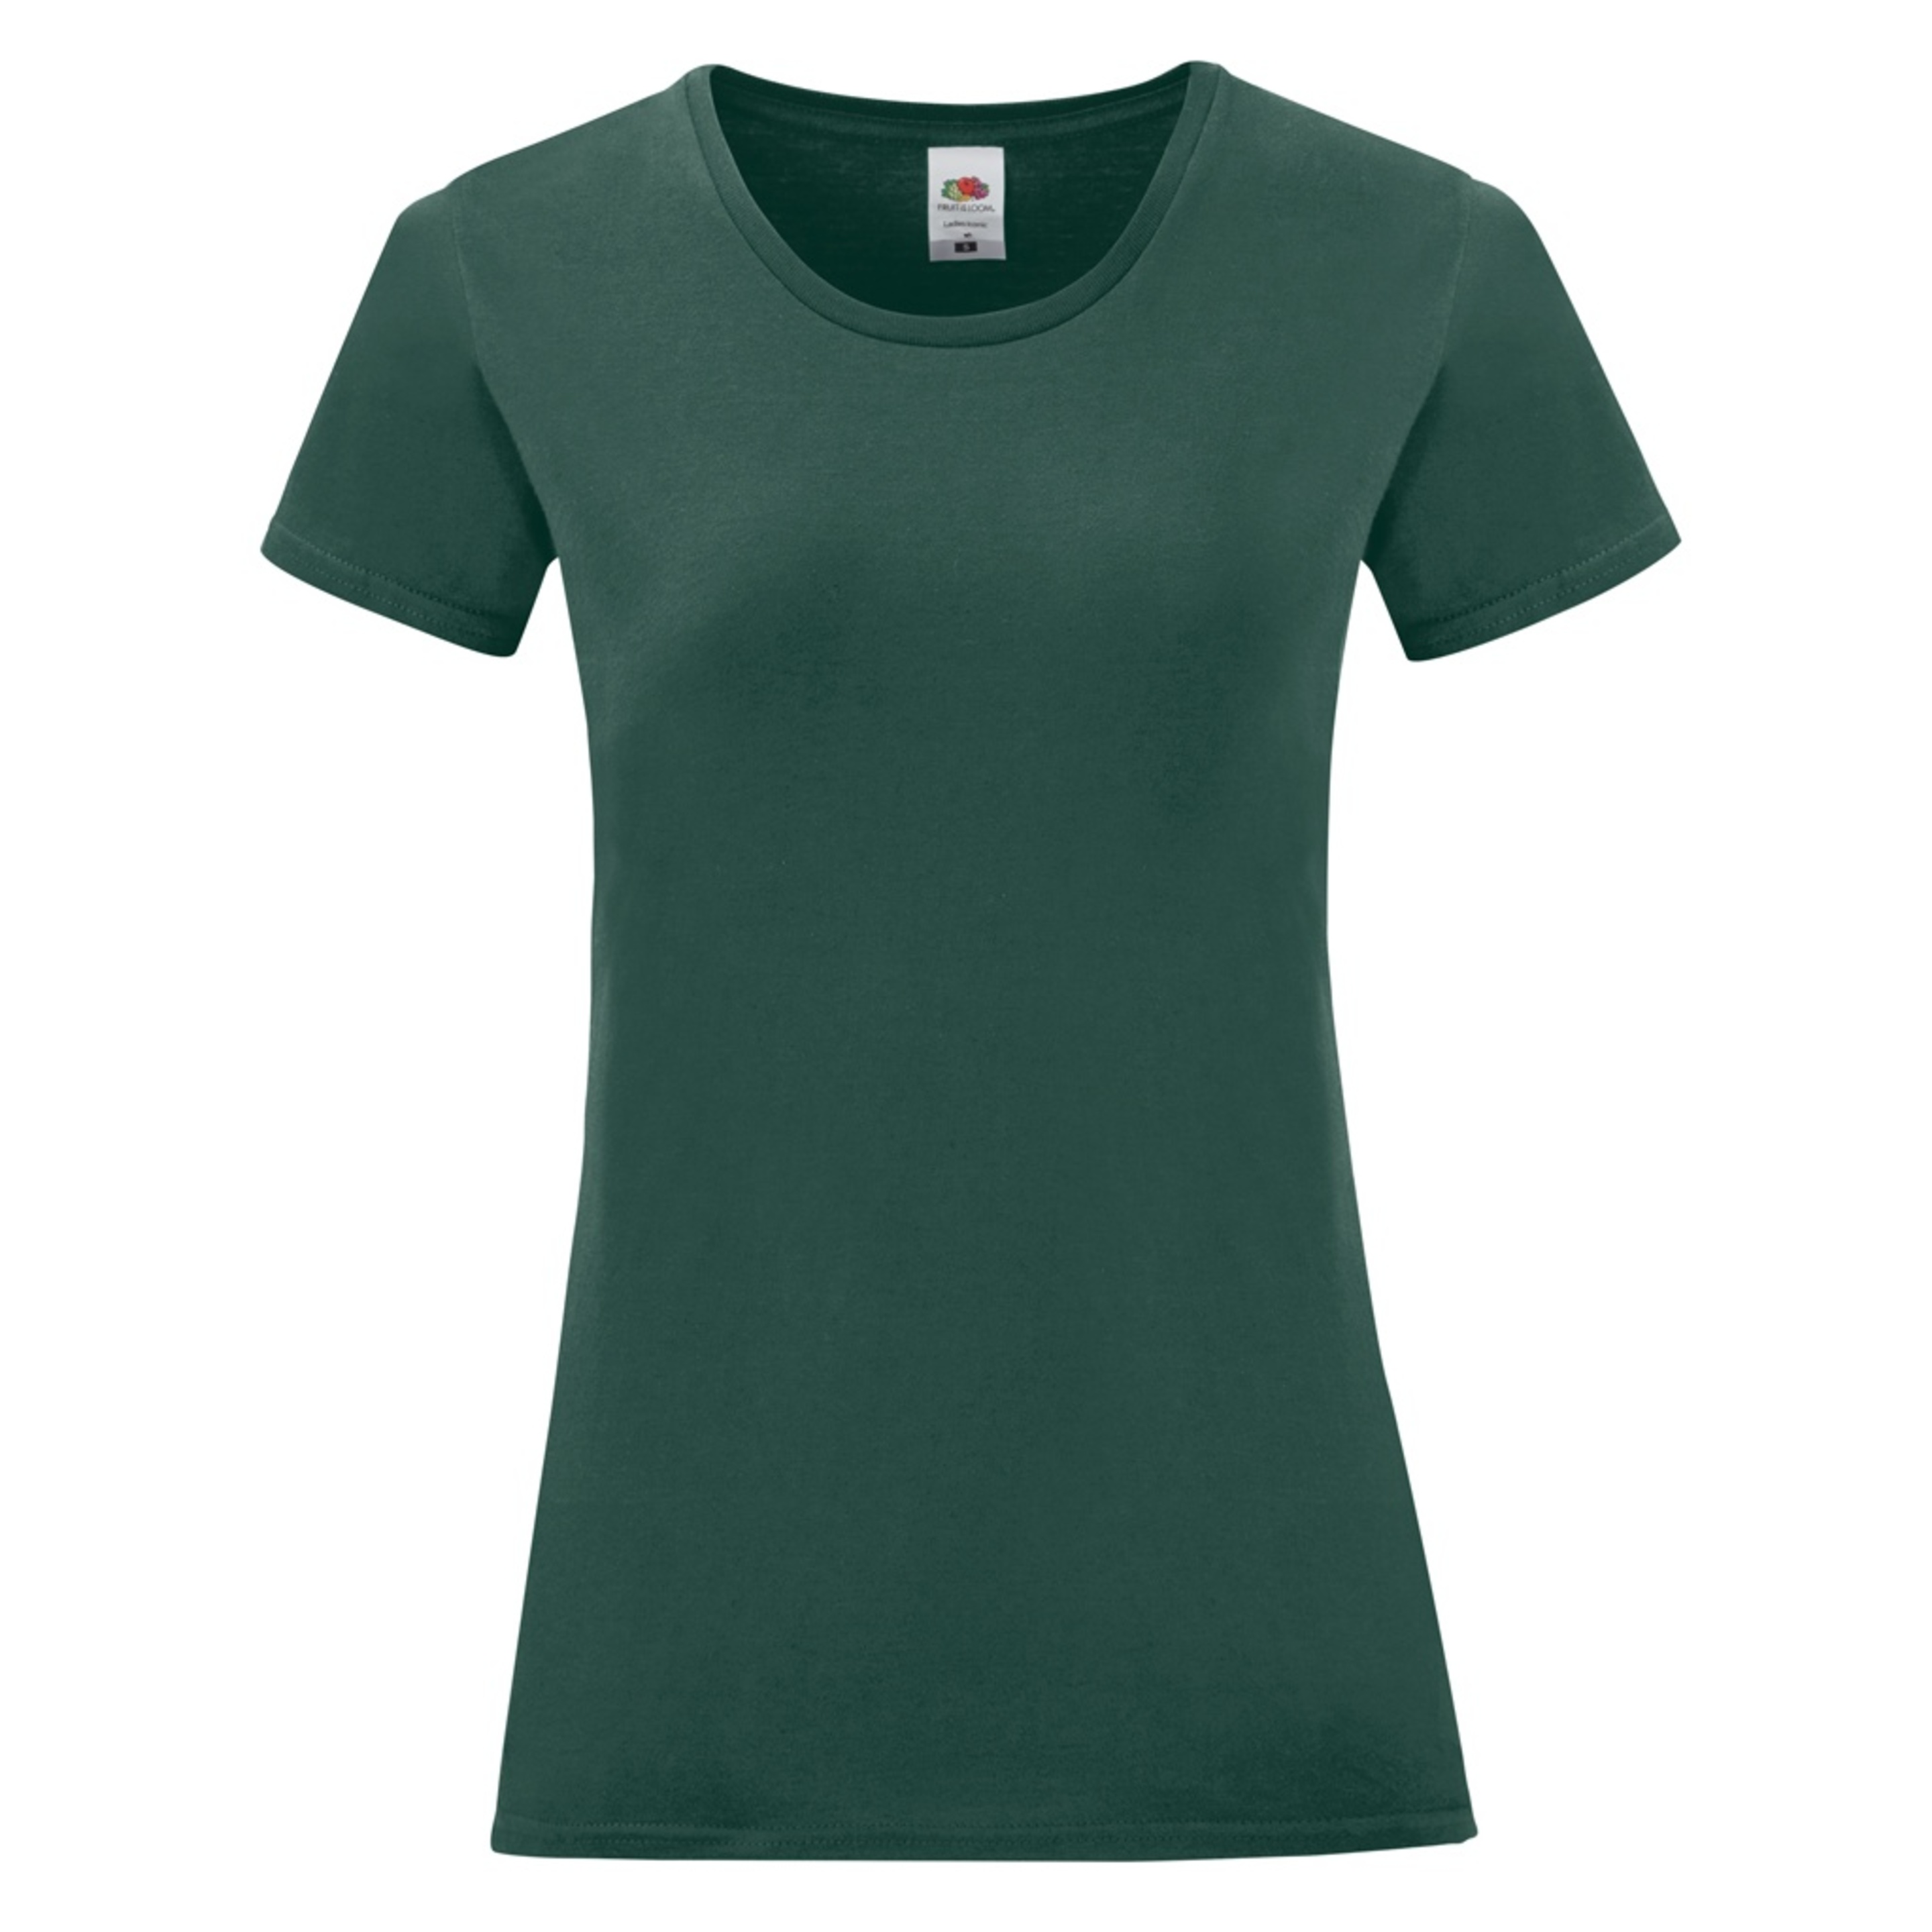 T-shirt Icónica Fruit Of The Loom - verde-oscuro - 